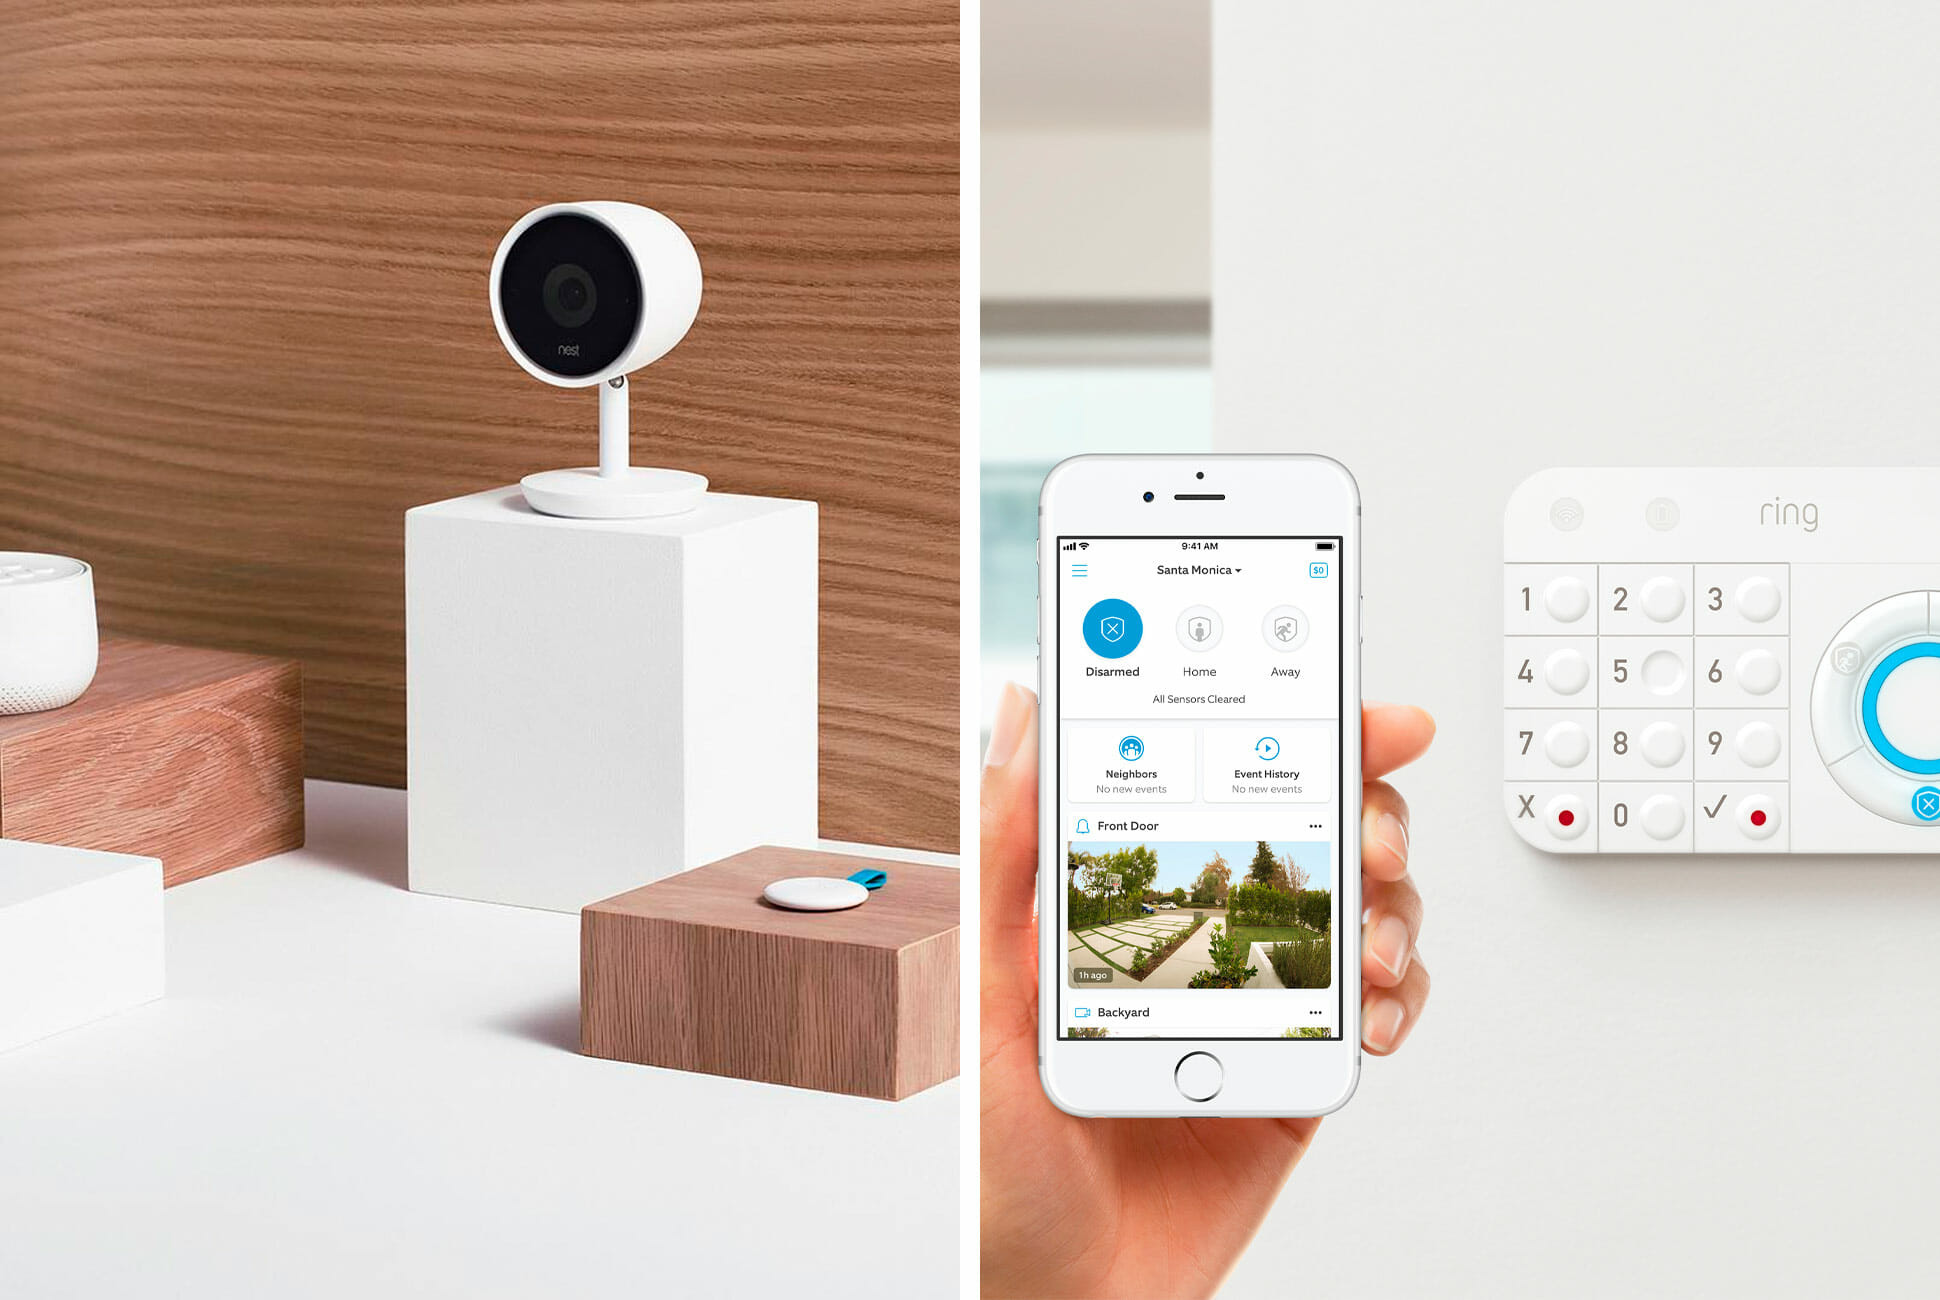 Best DIY Home Security System 2019
 The Best Smart Alarm Systems That You Can Install Yourself